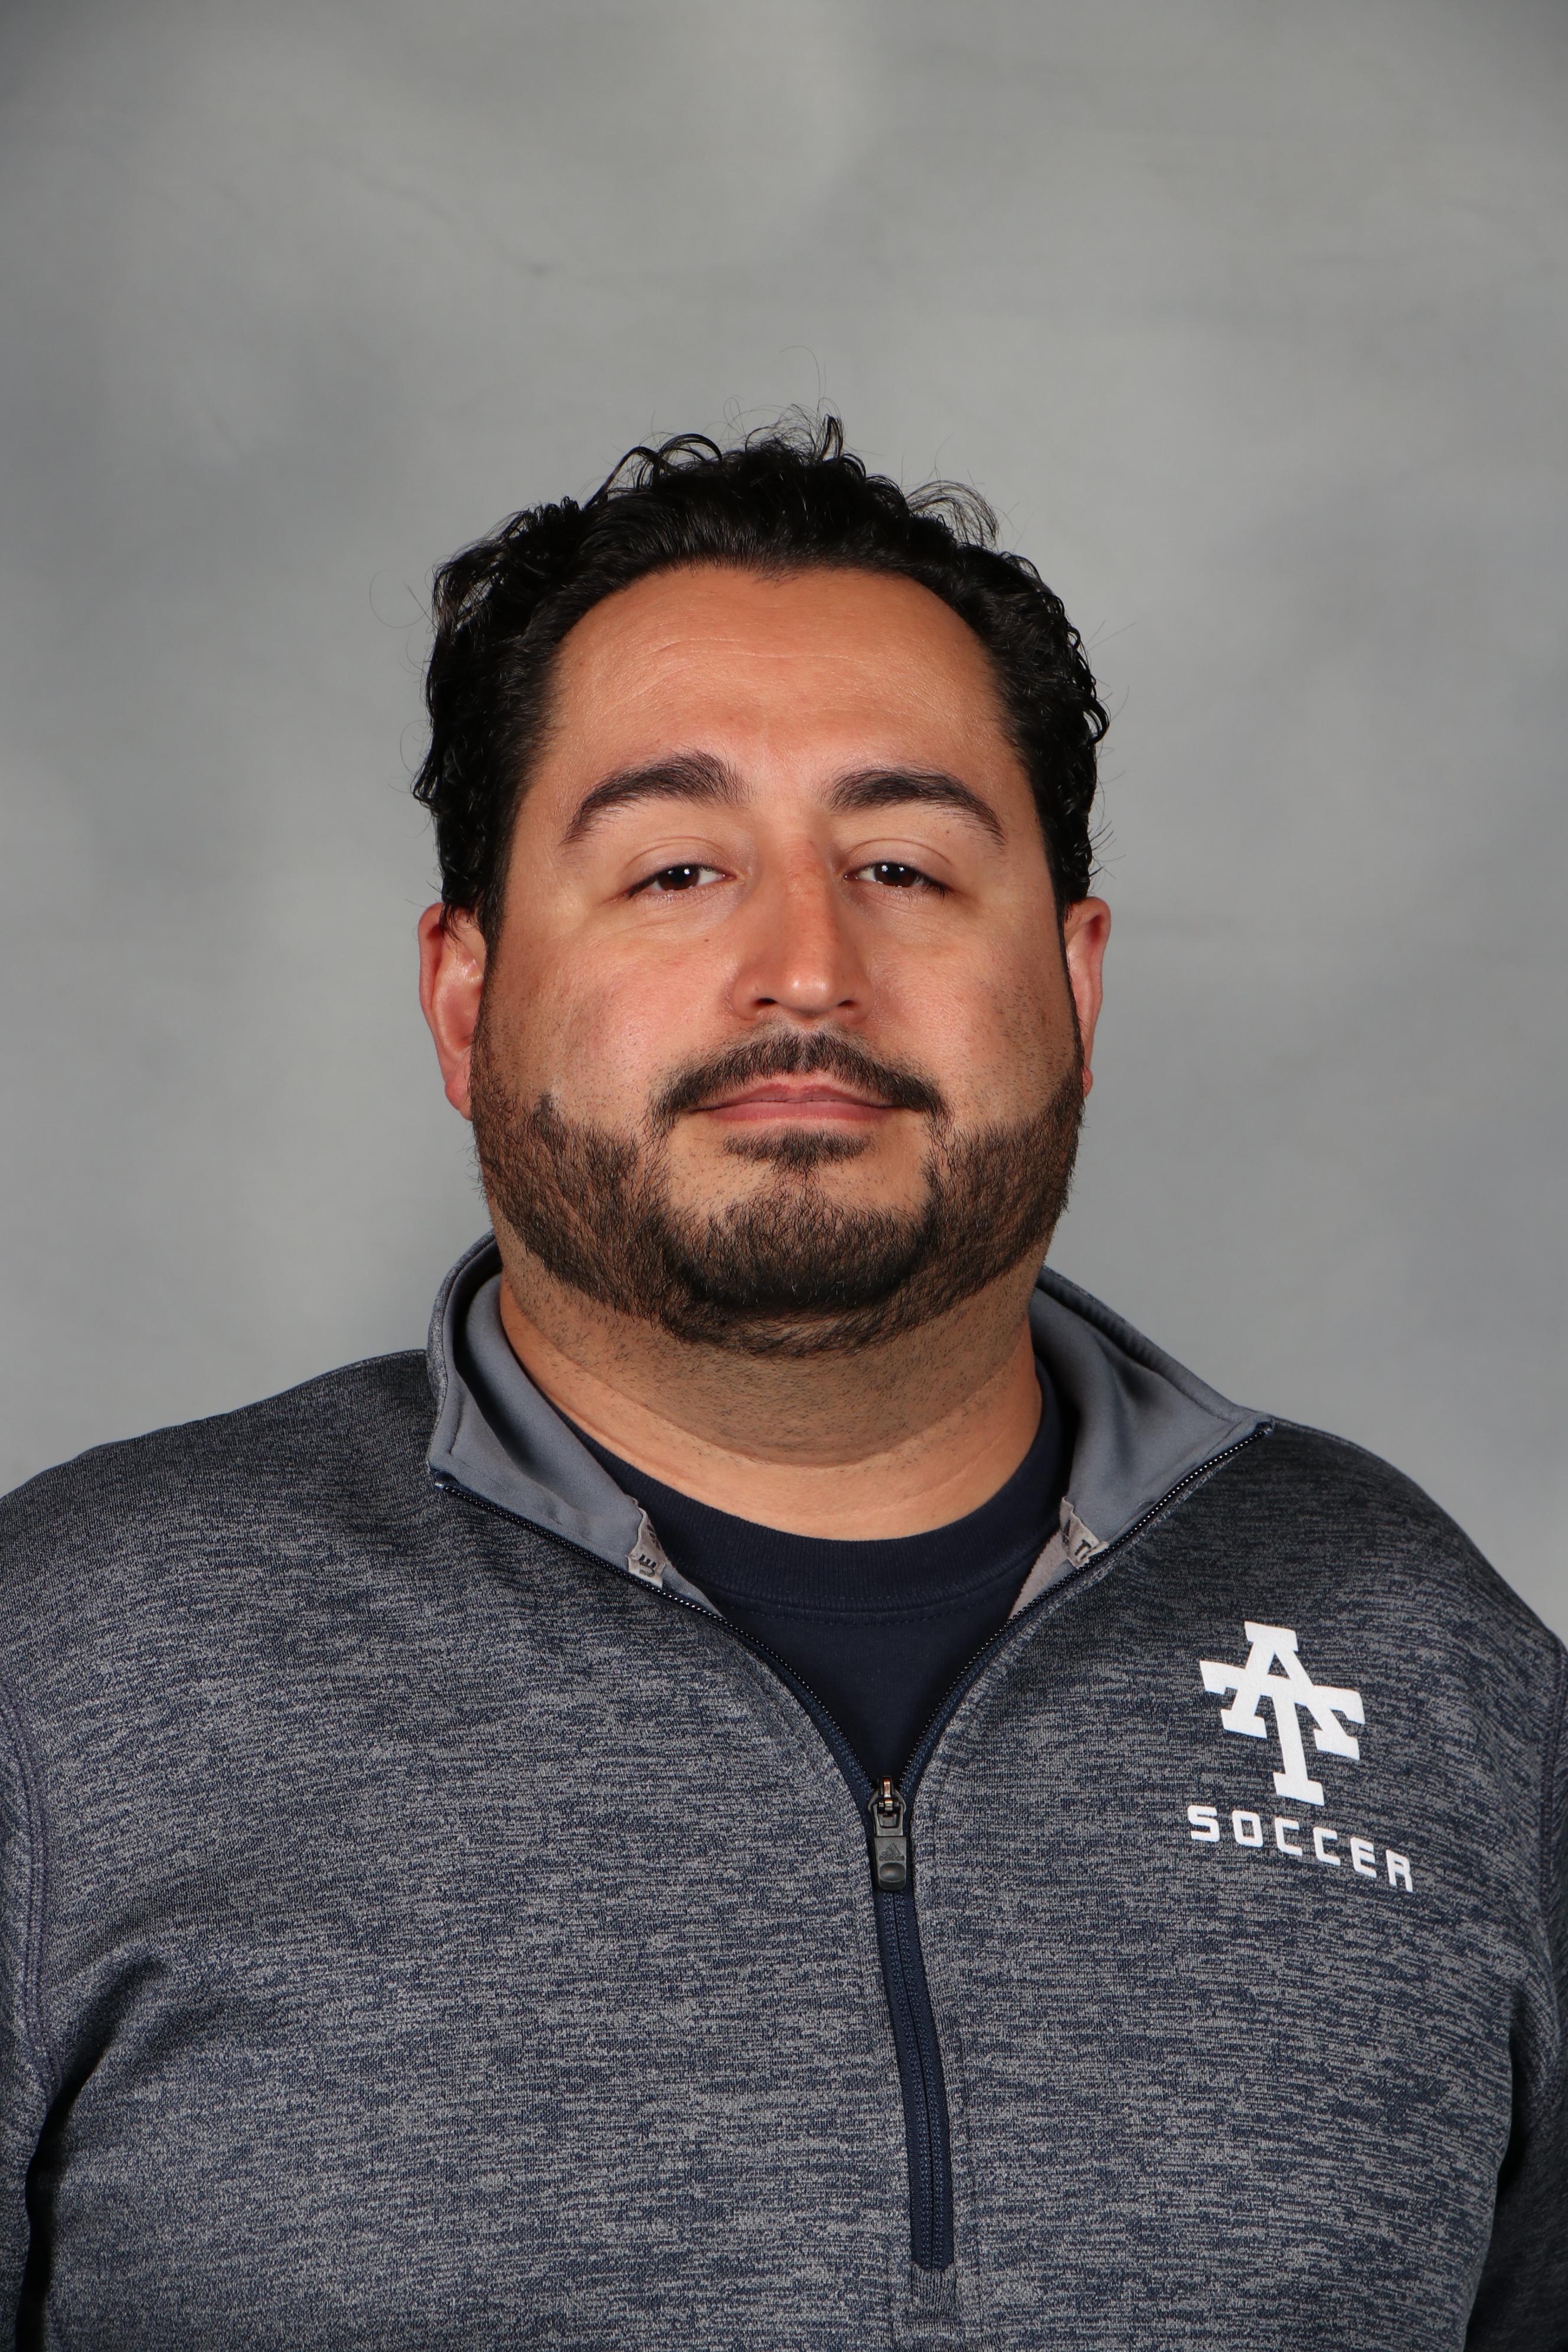 Addison Trail Boys Soccer Team coach named Assistant Coach of the Year